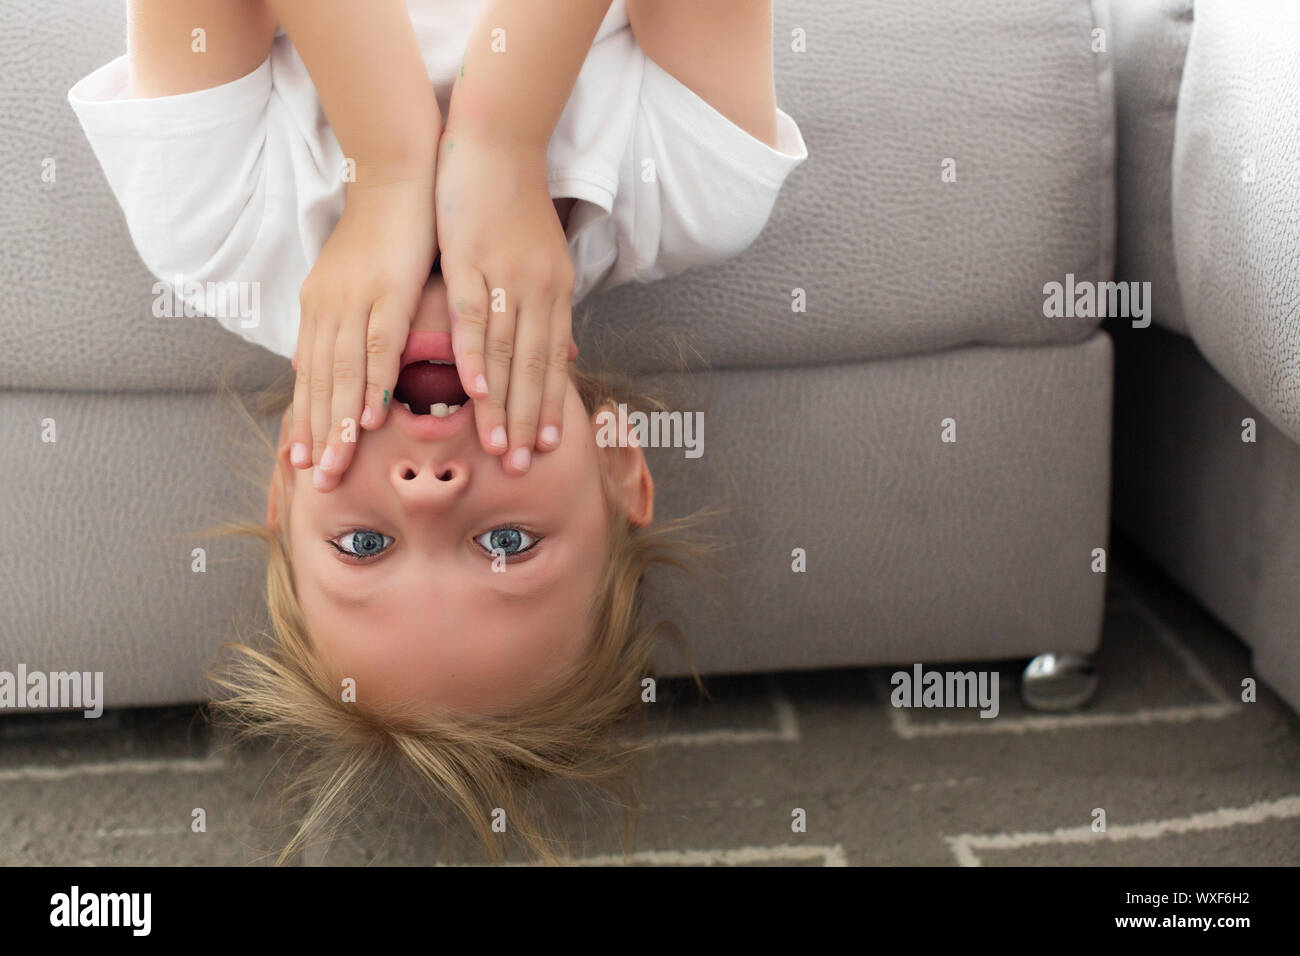 Amused funny girl hanging upside down on couch at home Stock Photo